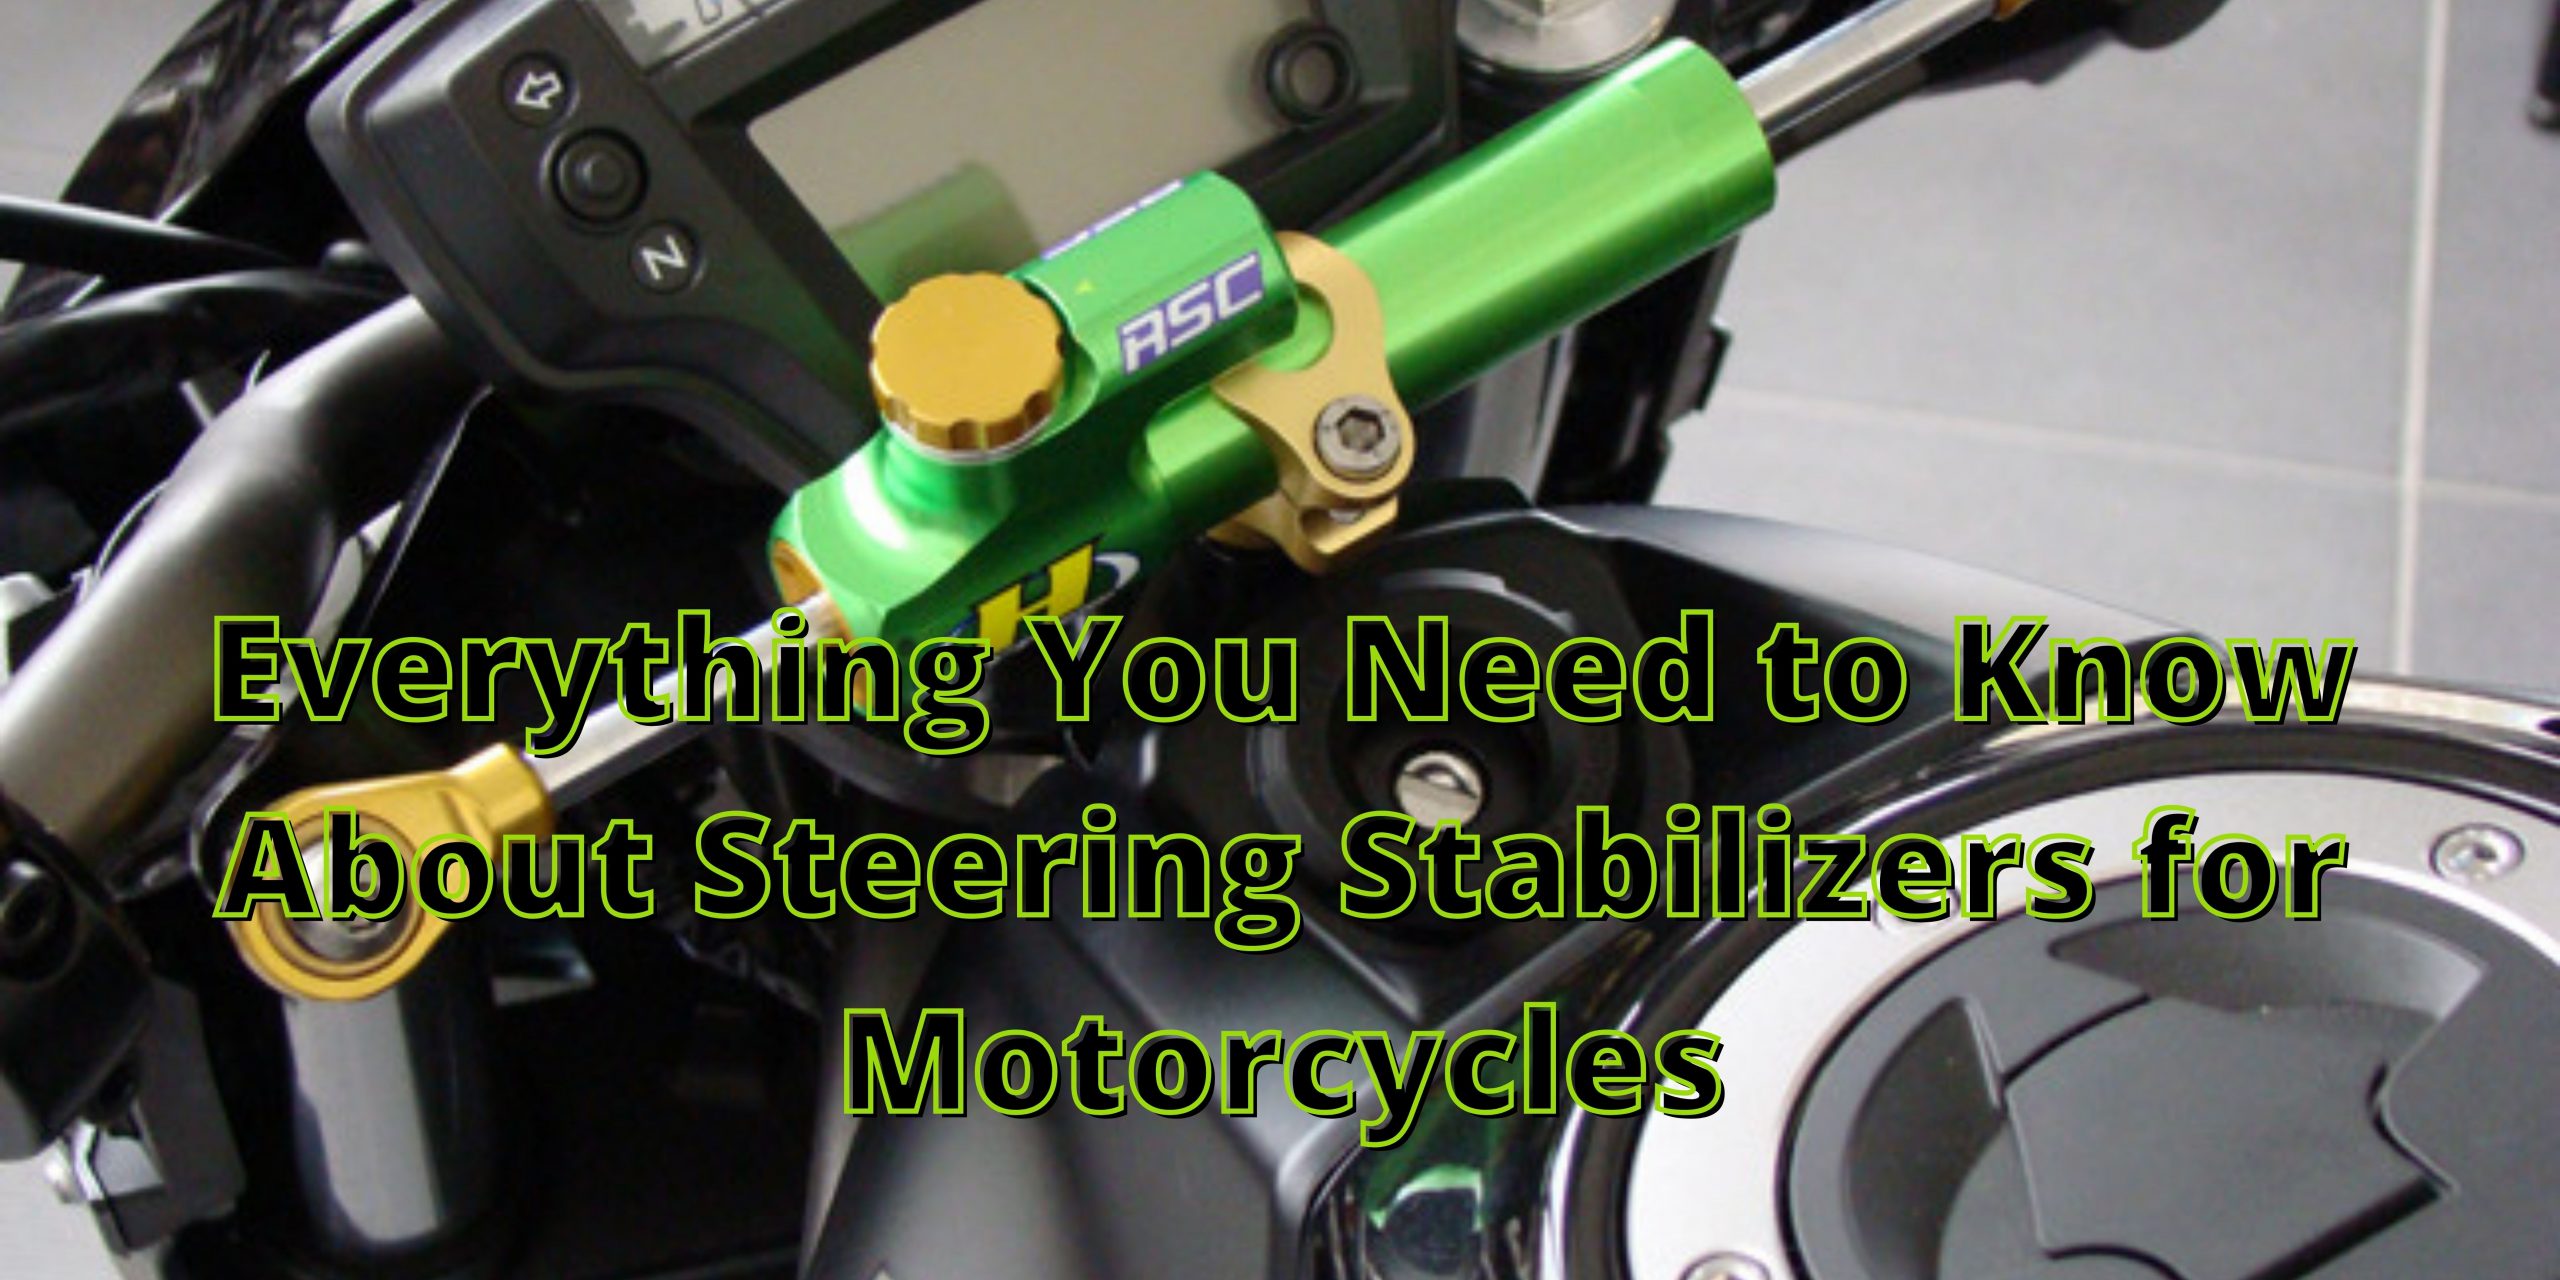 You are currently viewing Everything You Need to Know About Steering Stabilizers for Motorcycles